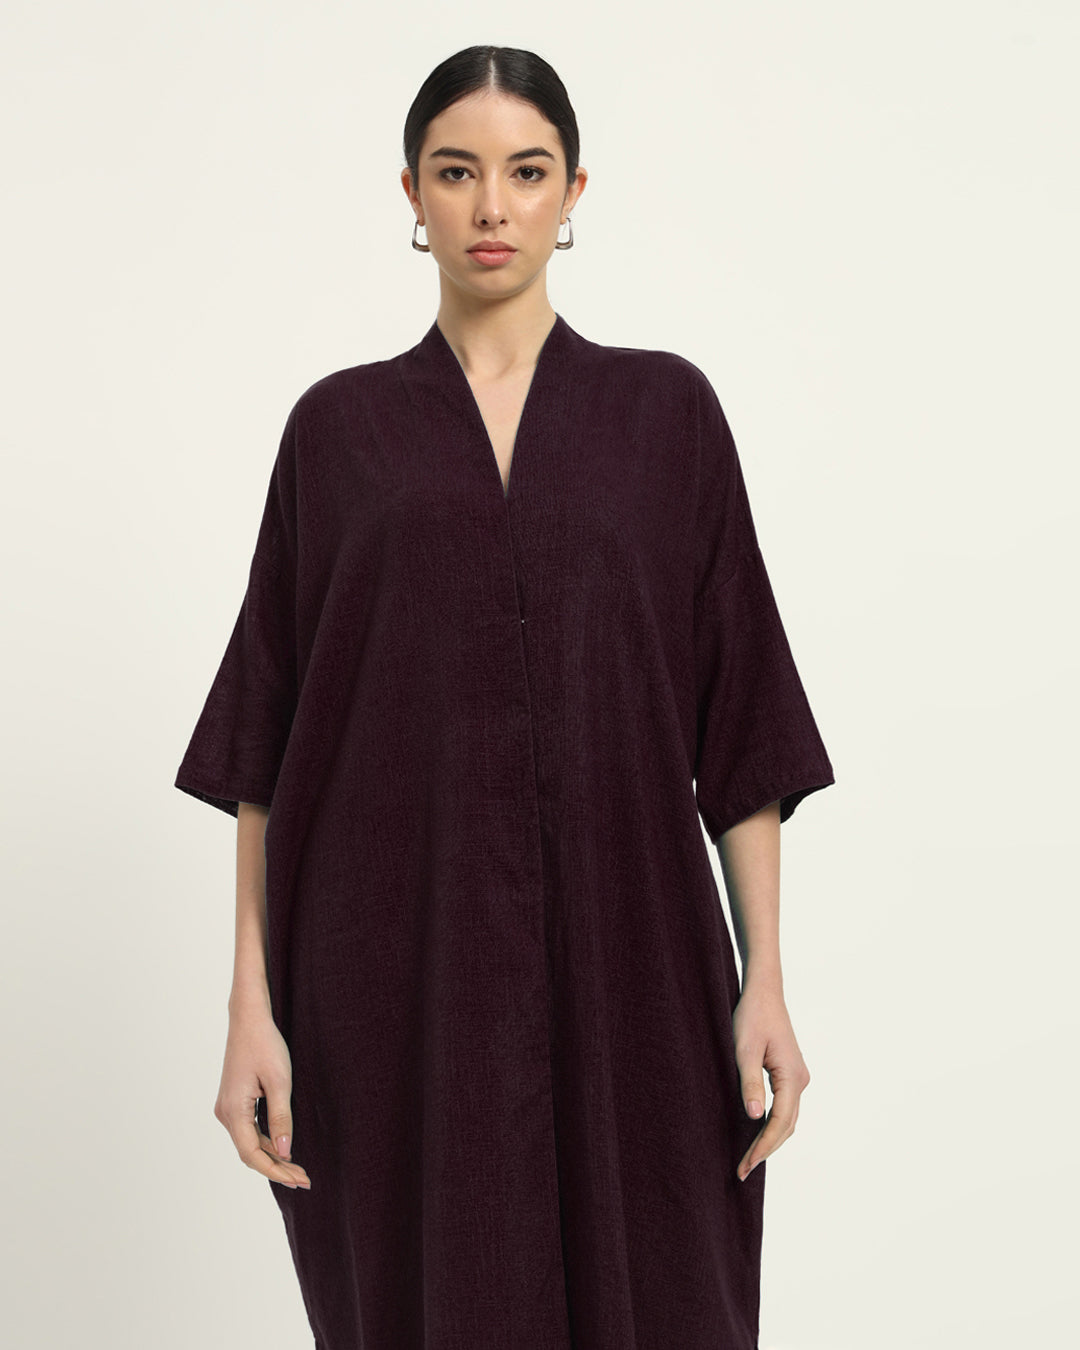 Plum Passion Serene Sojourn V Neck Solid Kurta (Without Bottoms)